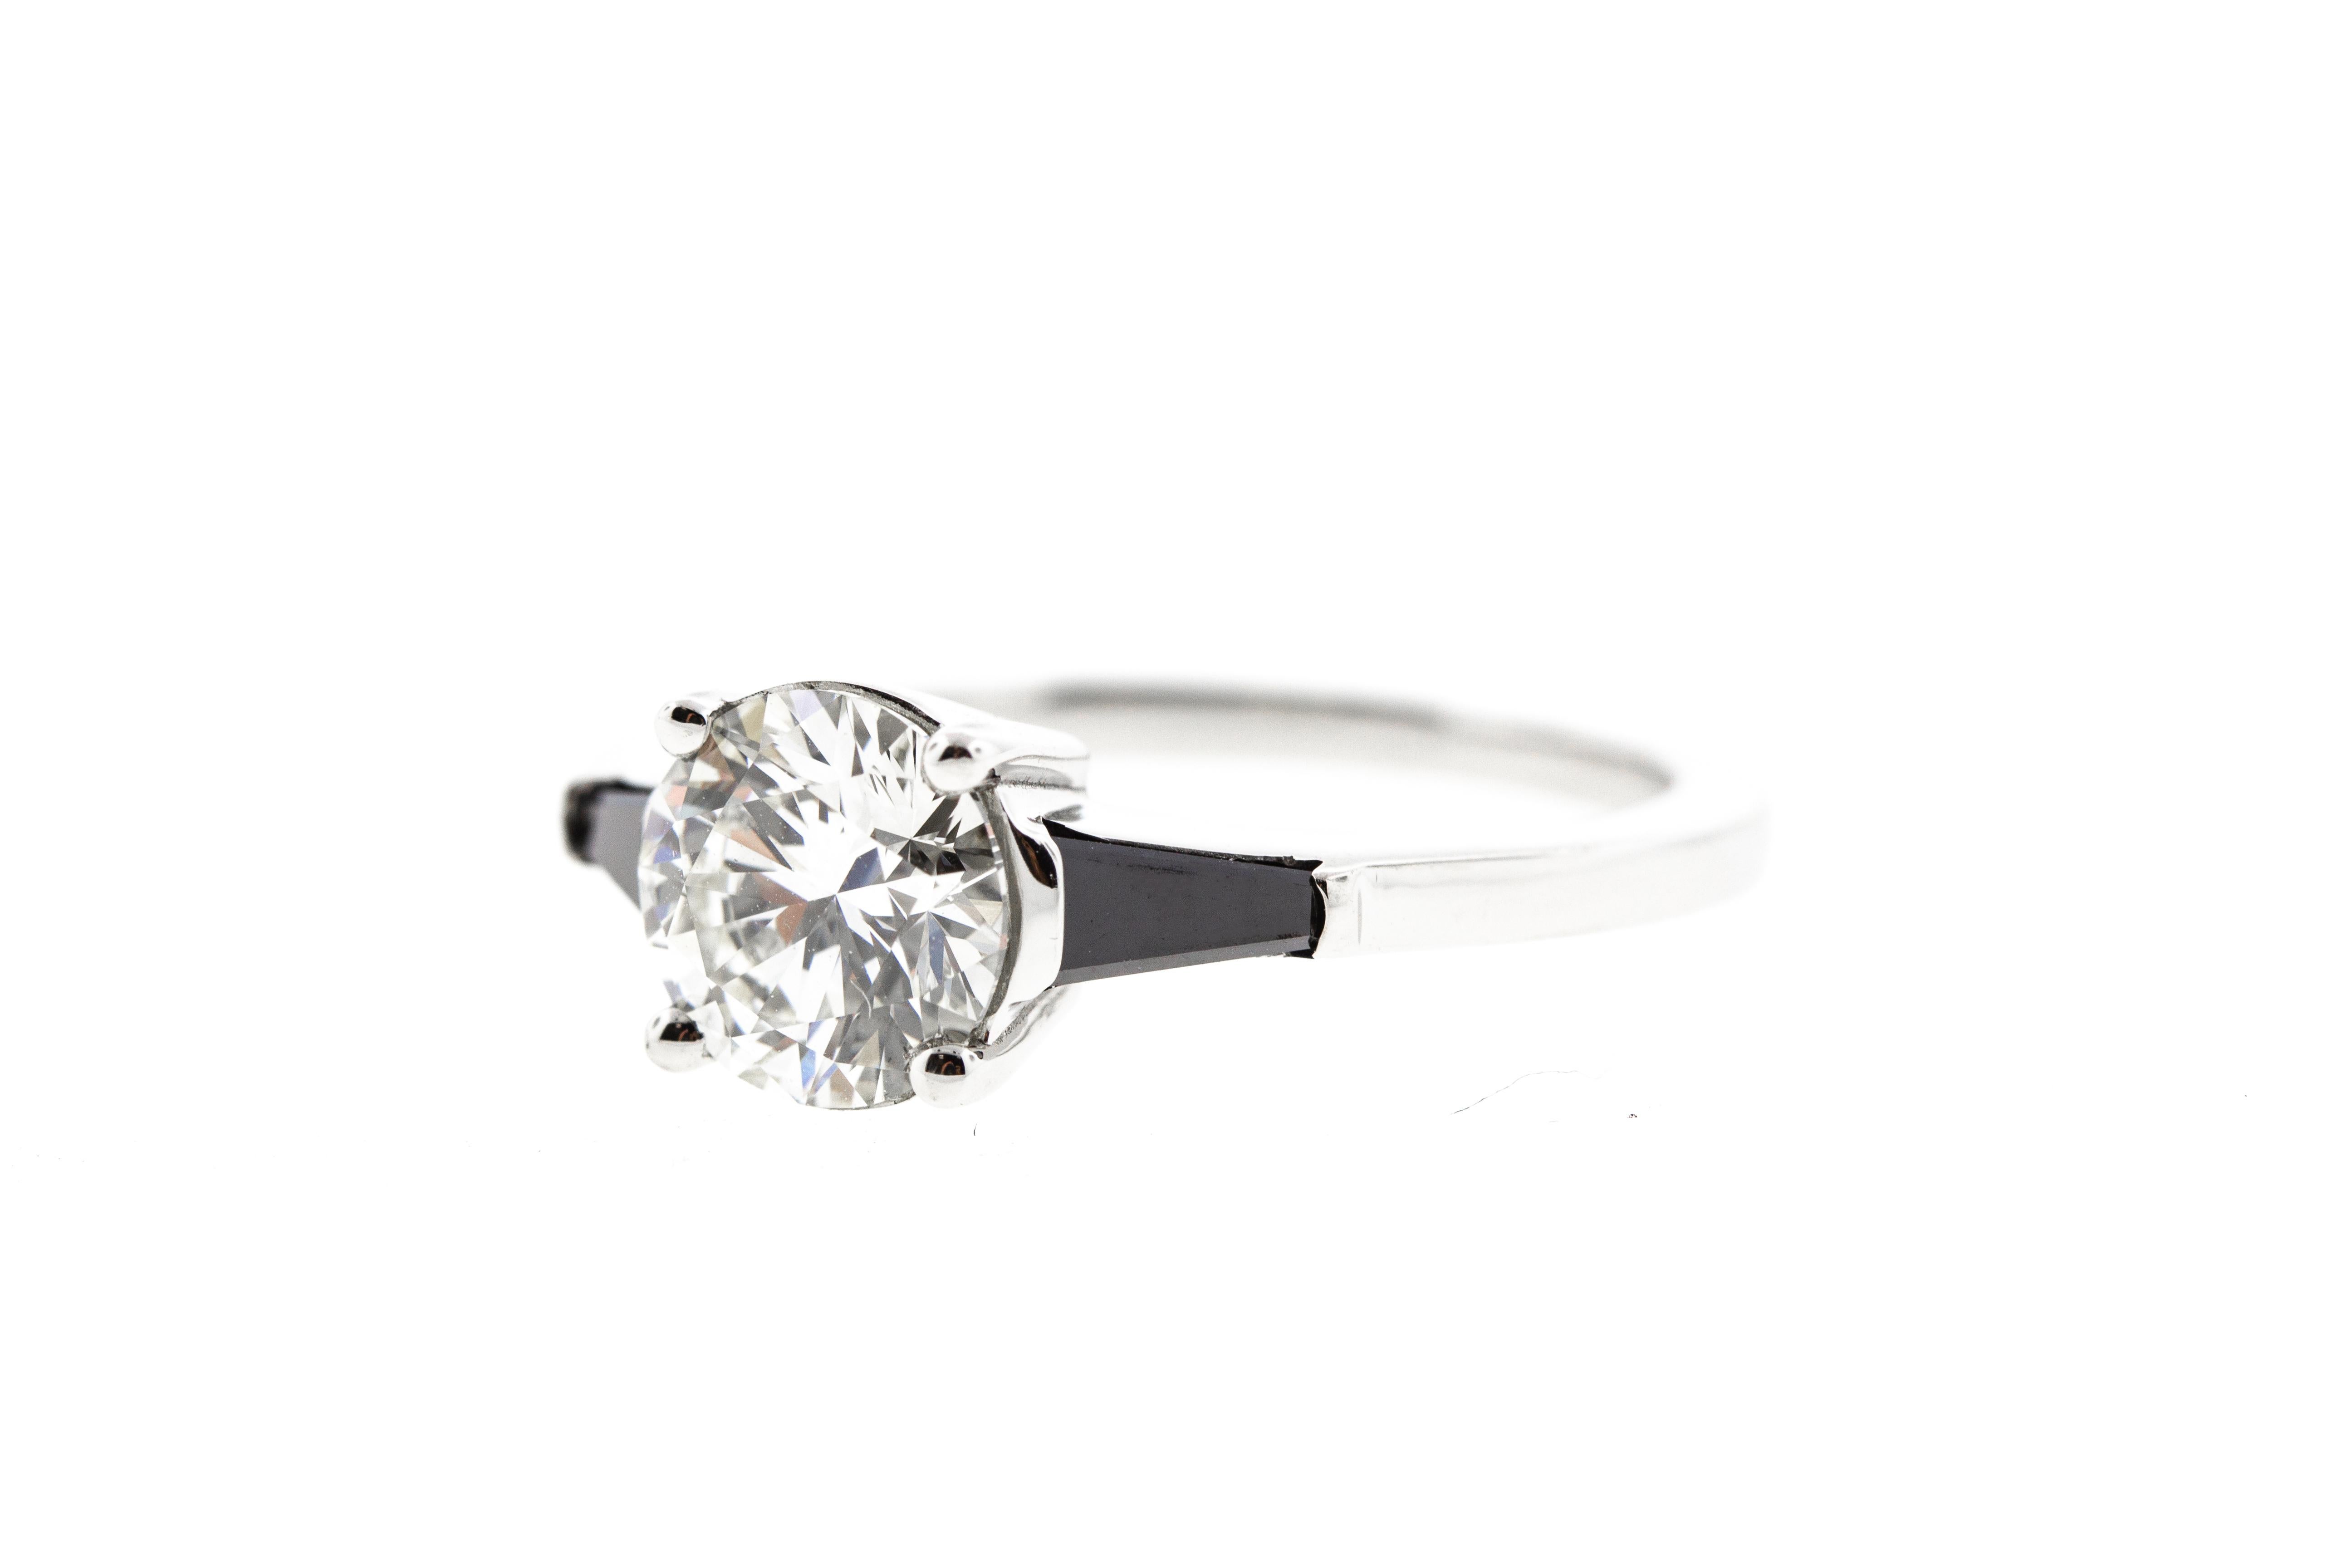 This ring is crafted in platinum, and contains a Round Diamond (1.08 total carat weight, G color, VS1 clarity) surrounded by 2 black diamond baguettes (0.24 total carat weight). With a raised profile and set in platinum, this ring is perfect for the